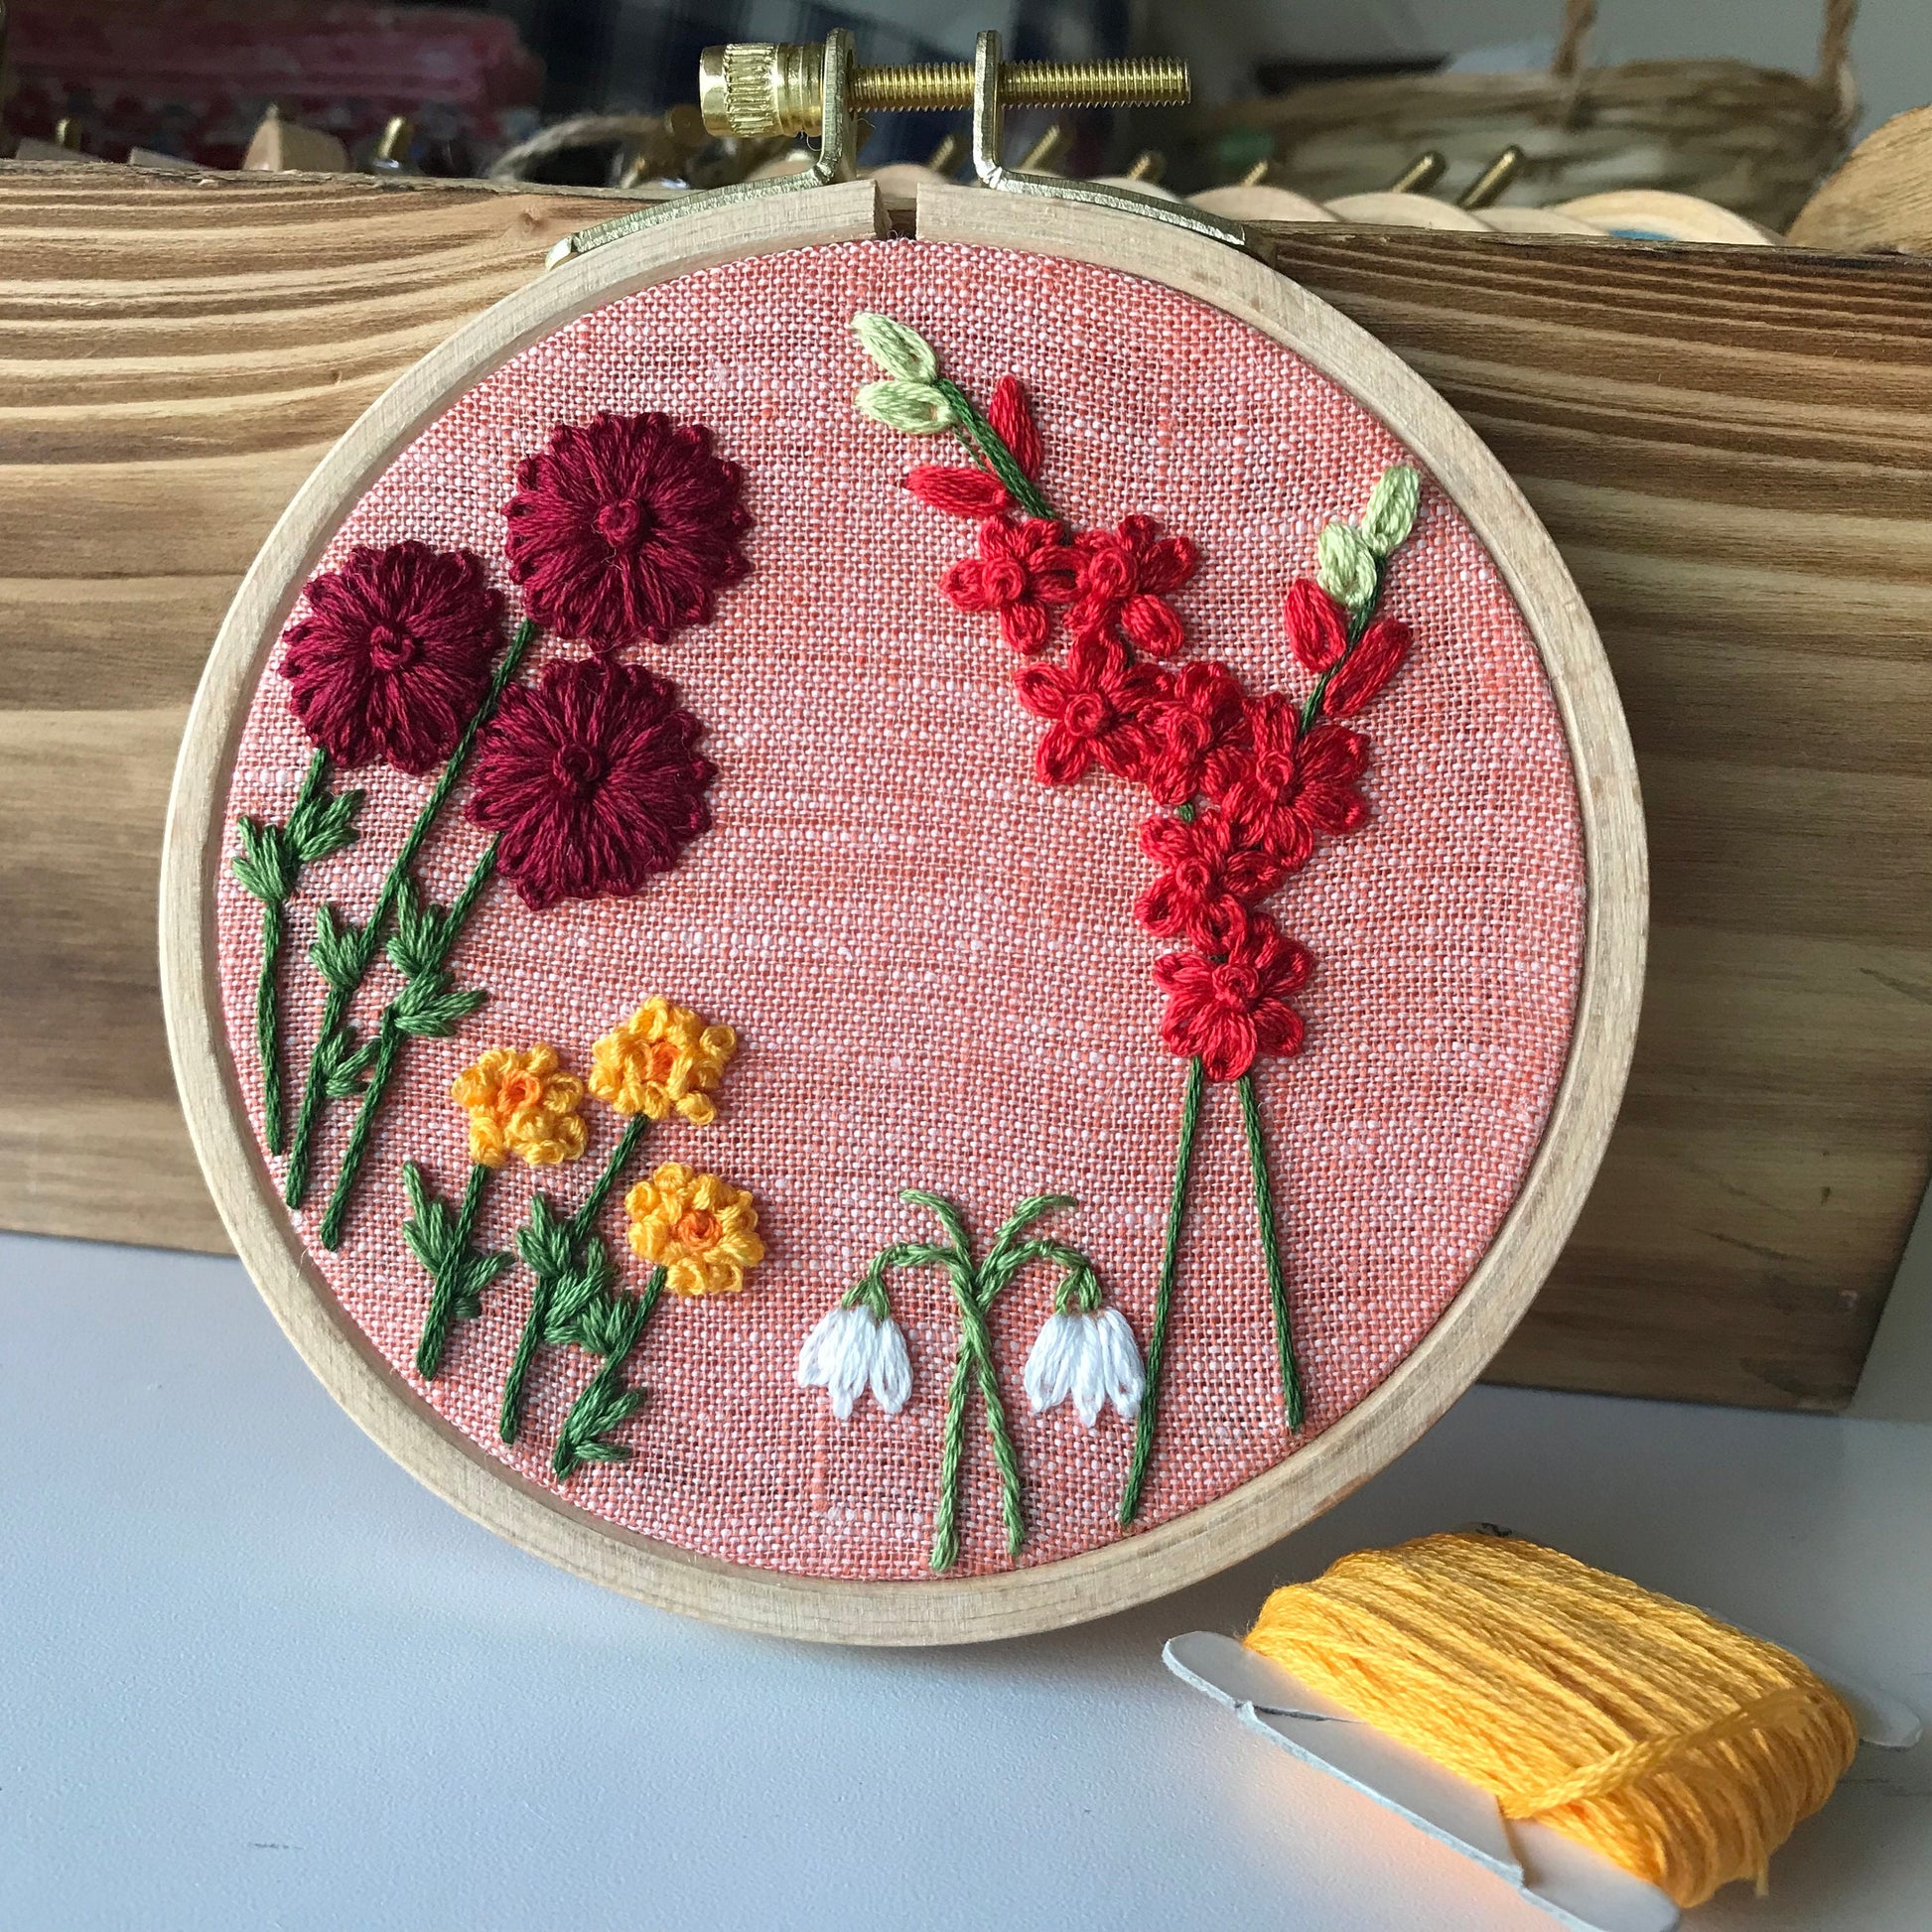 Hand Embroidery Starter with Pattern, Stitch Embroidery Cloth with Color Pattern, Embroidery Hoop, Threads, Tools (Floral